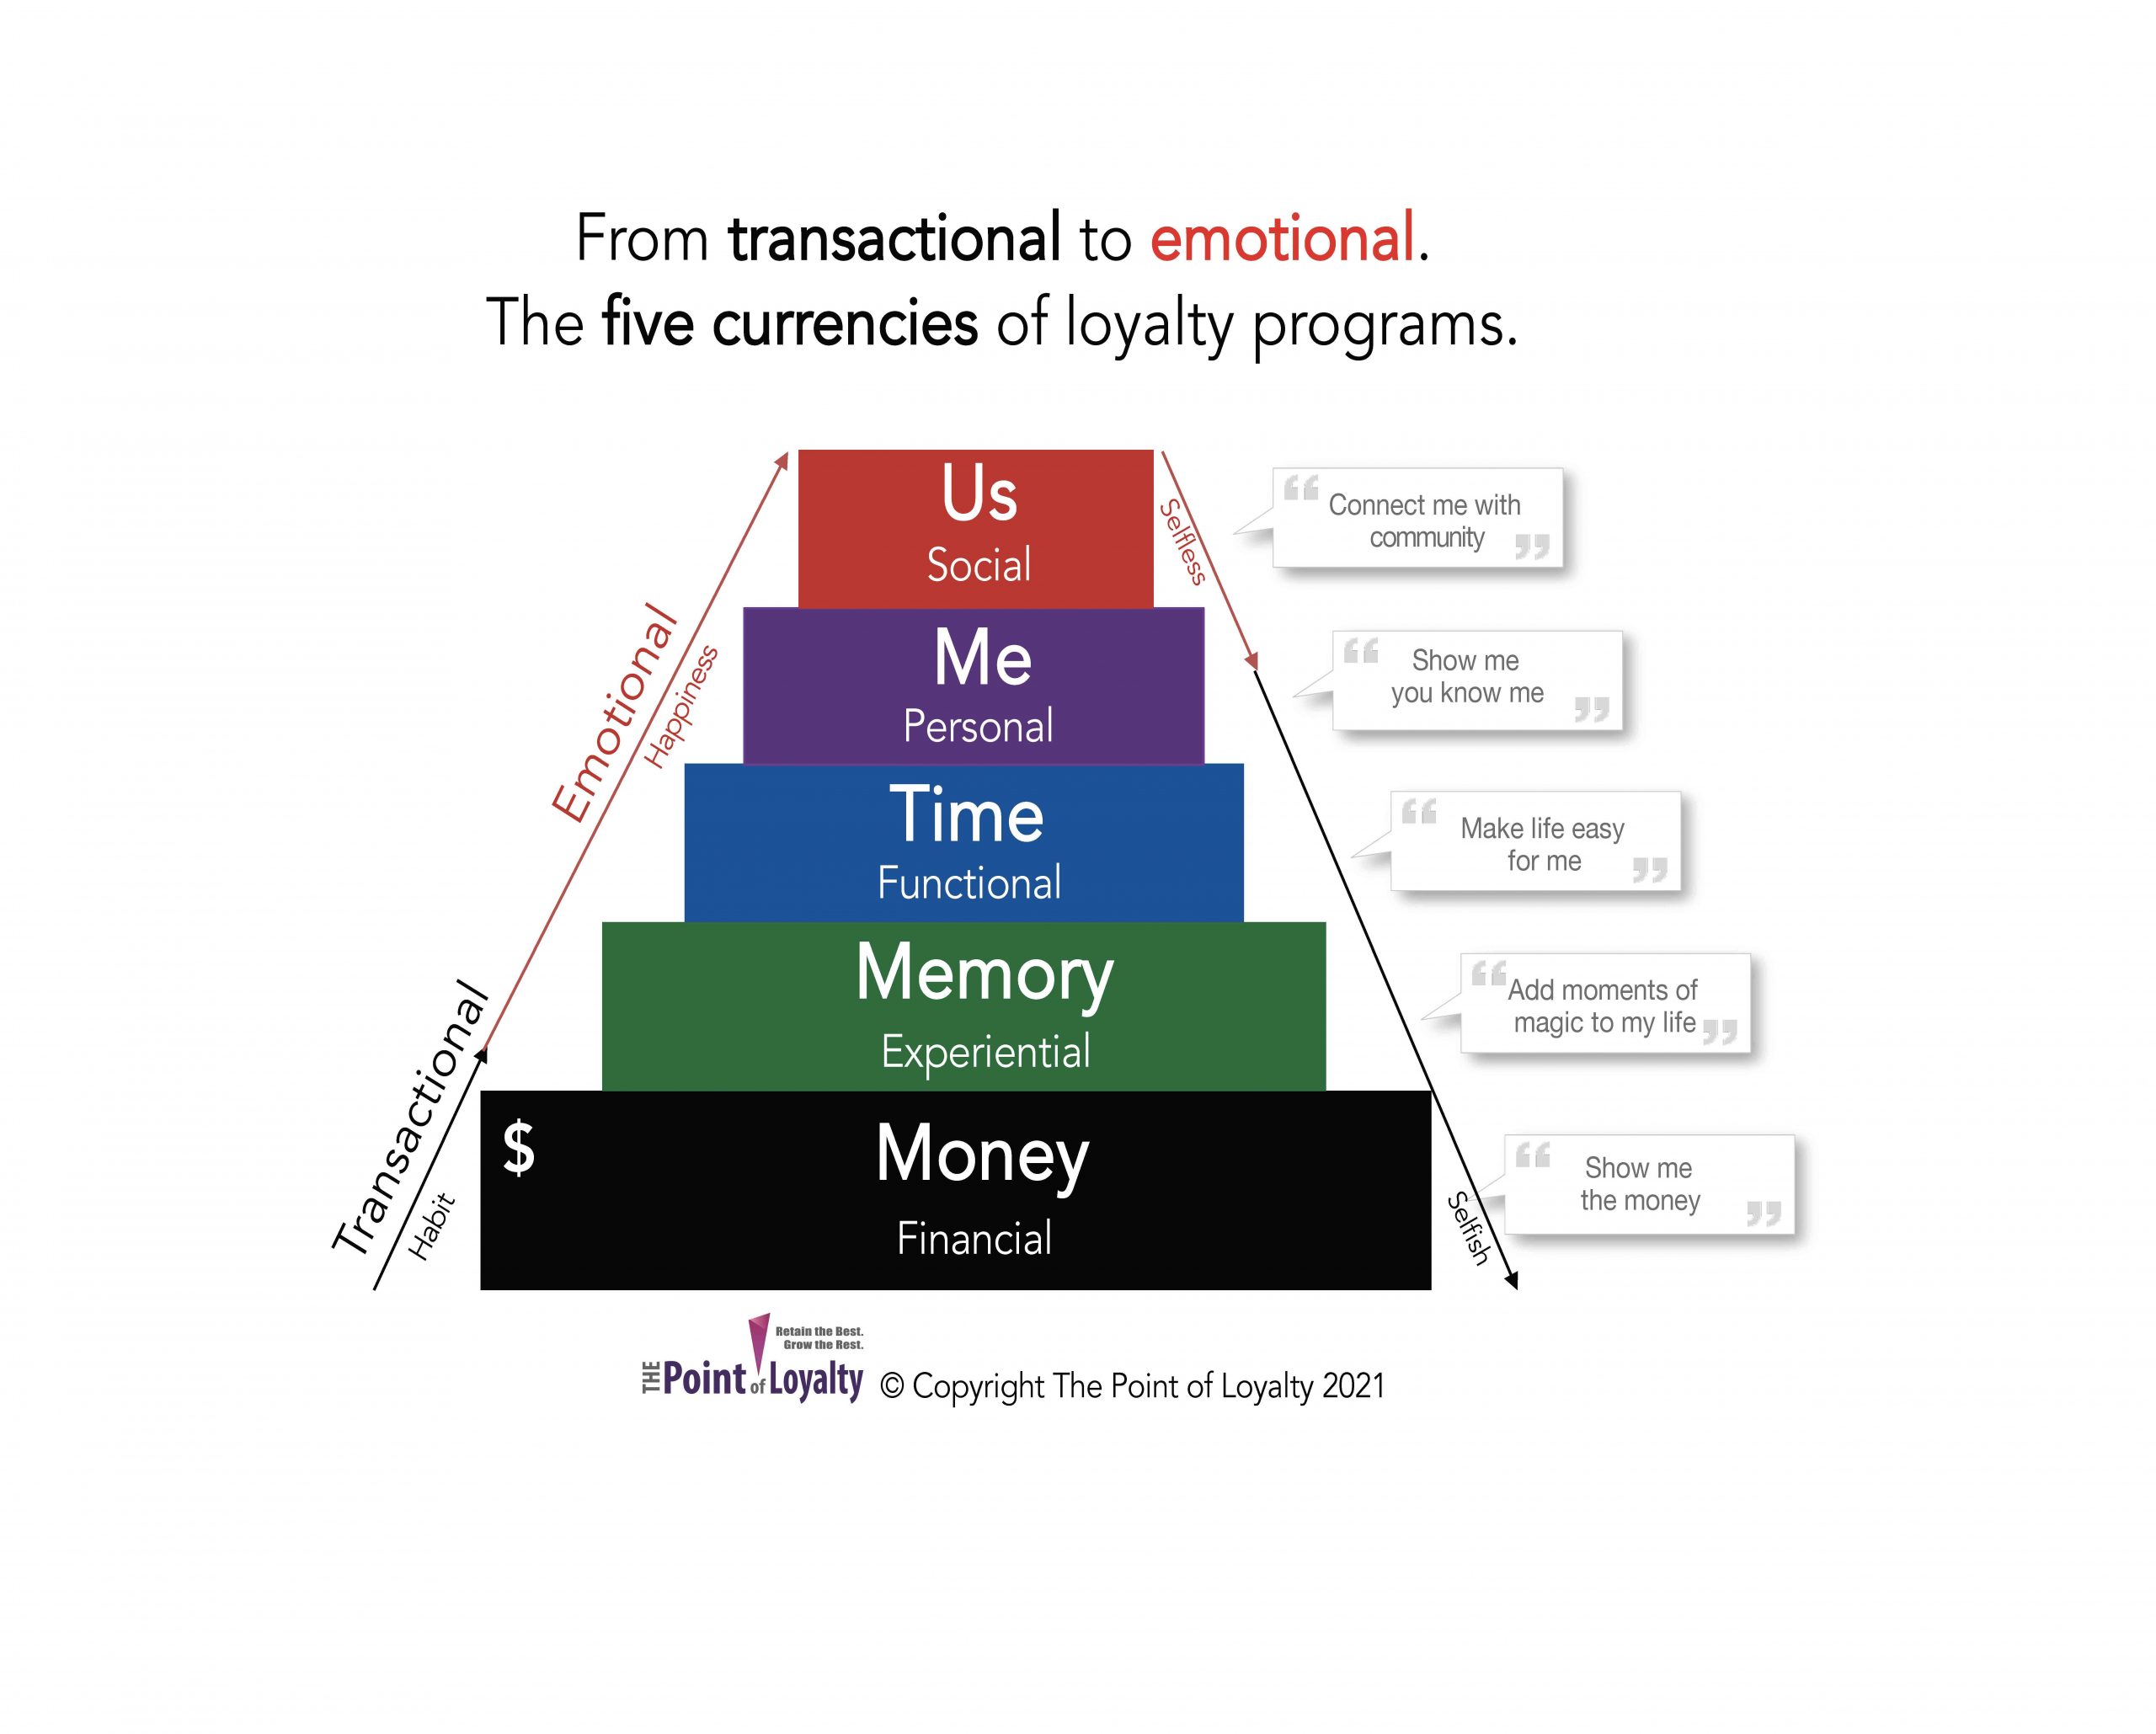 The five currencies of loyalty programs